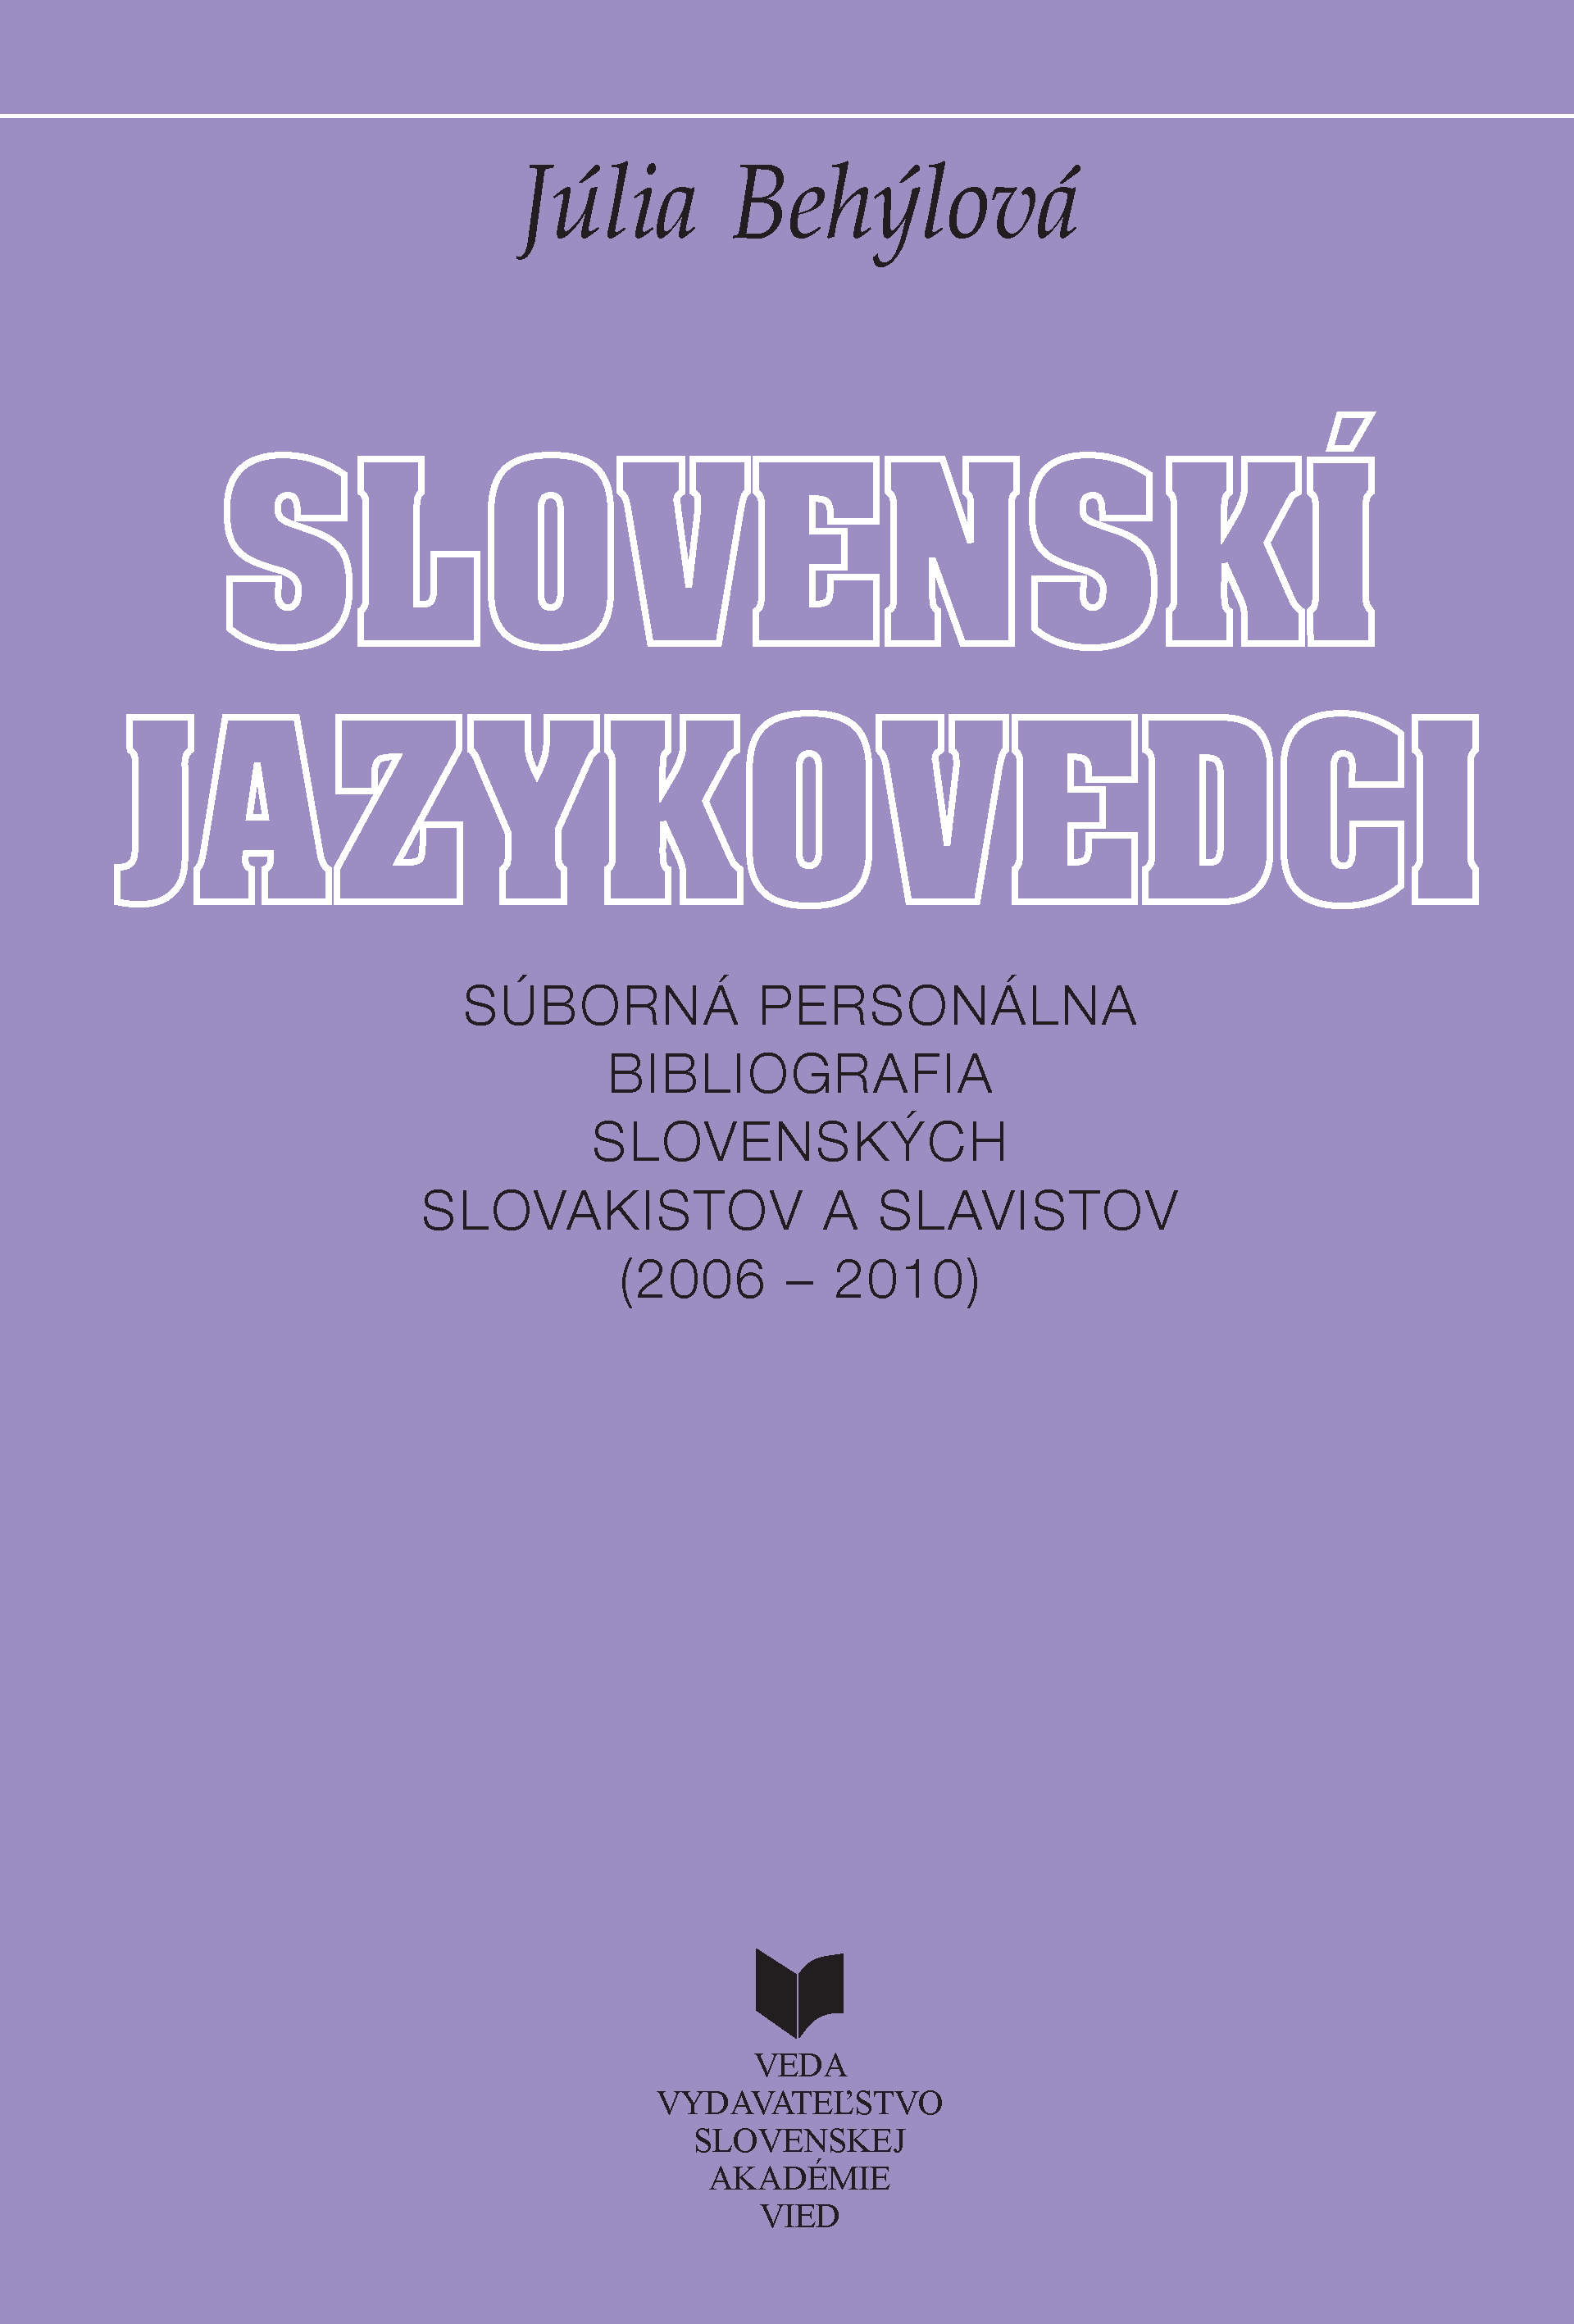 jazykovedci_2006_2010.png